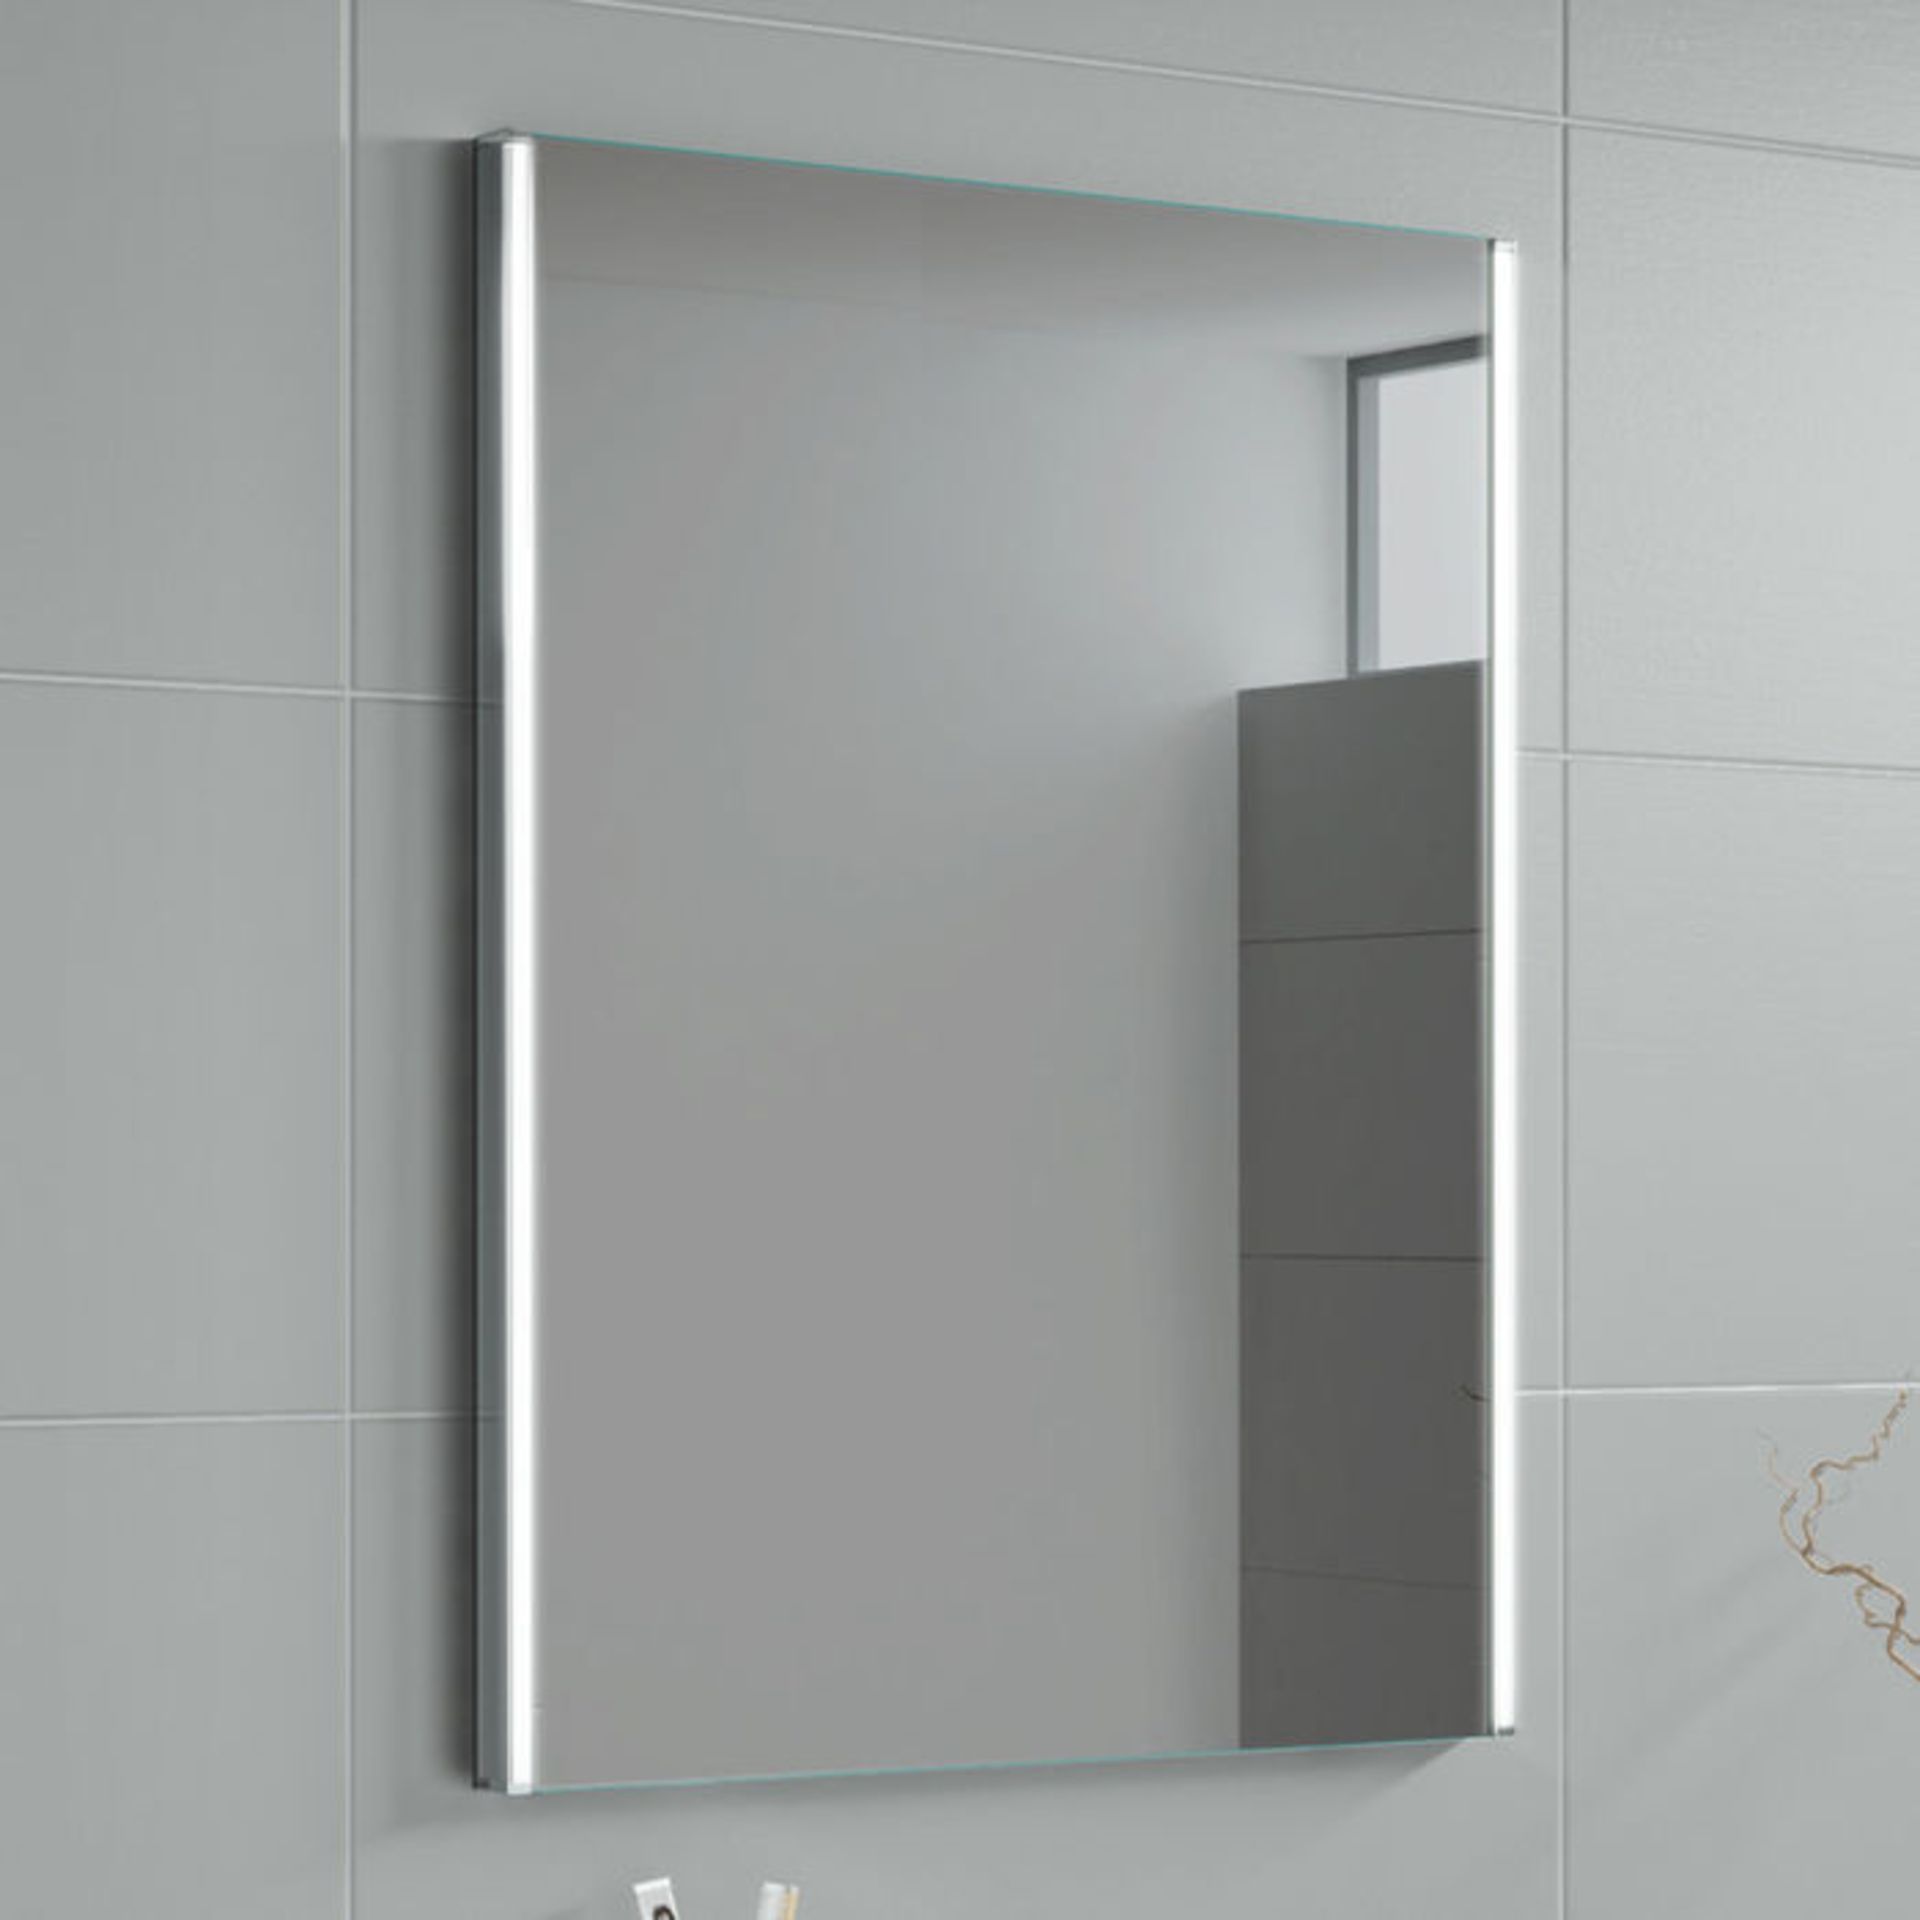 (ZL177) 500x700mm Denver Illuminated LED Mirror - Battery Operated. Energy saving controlled On / - Image 3 of 4